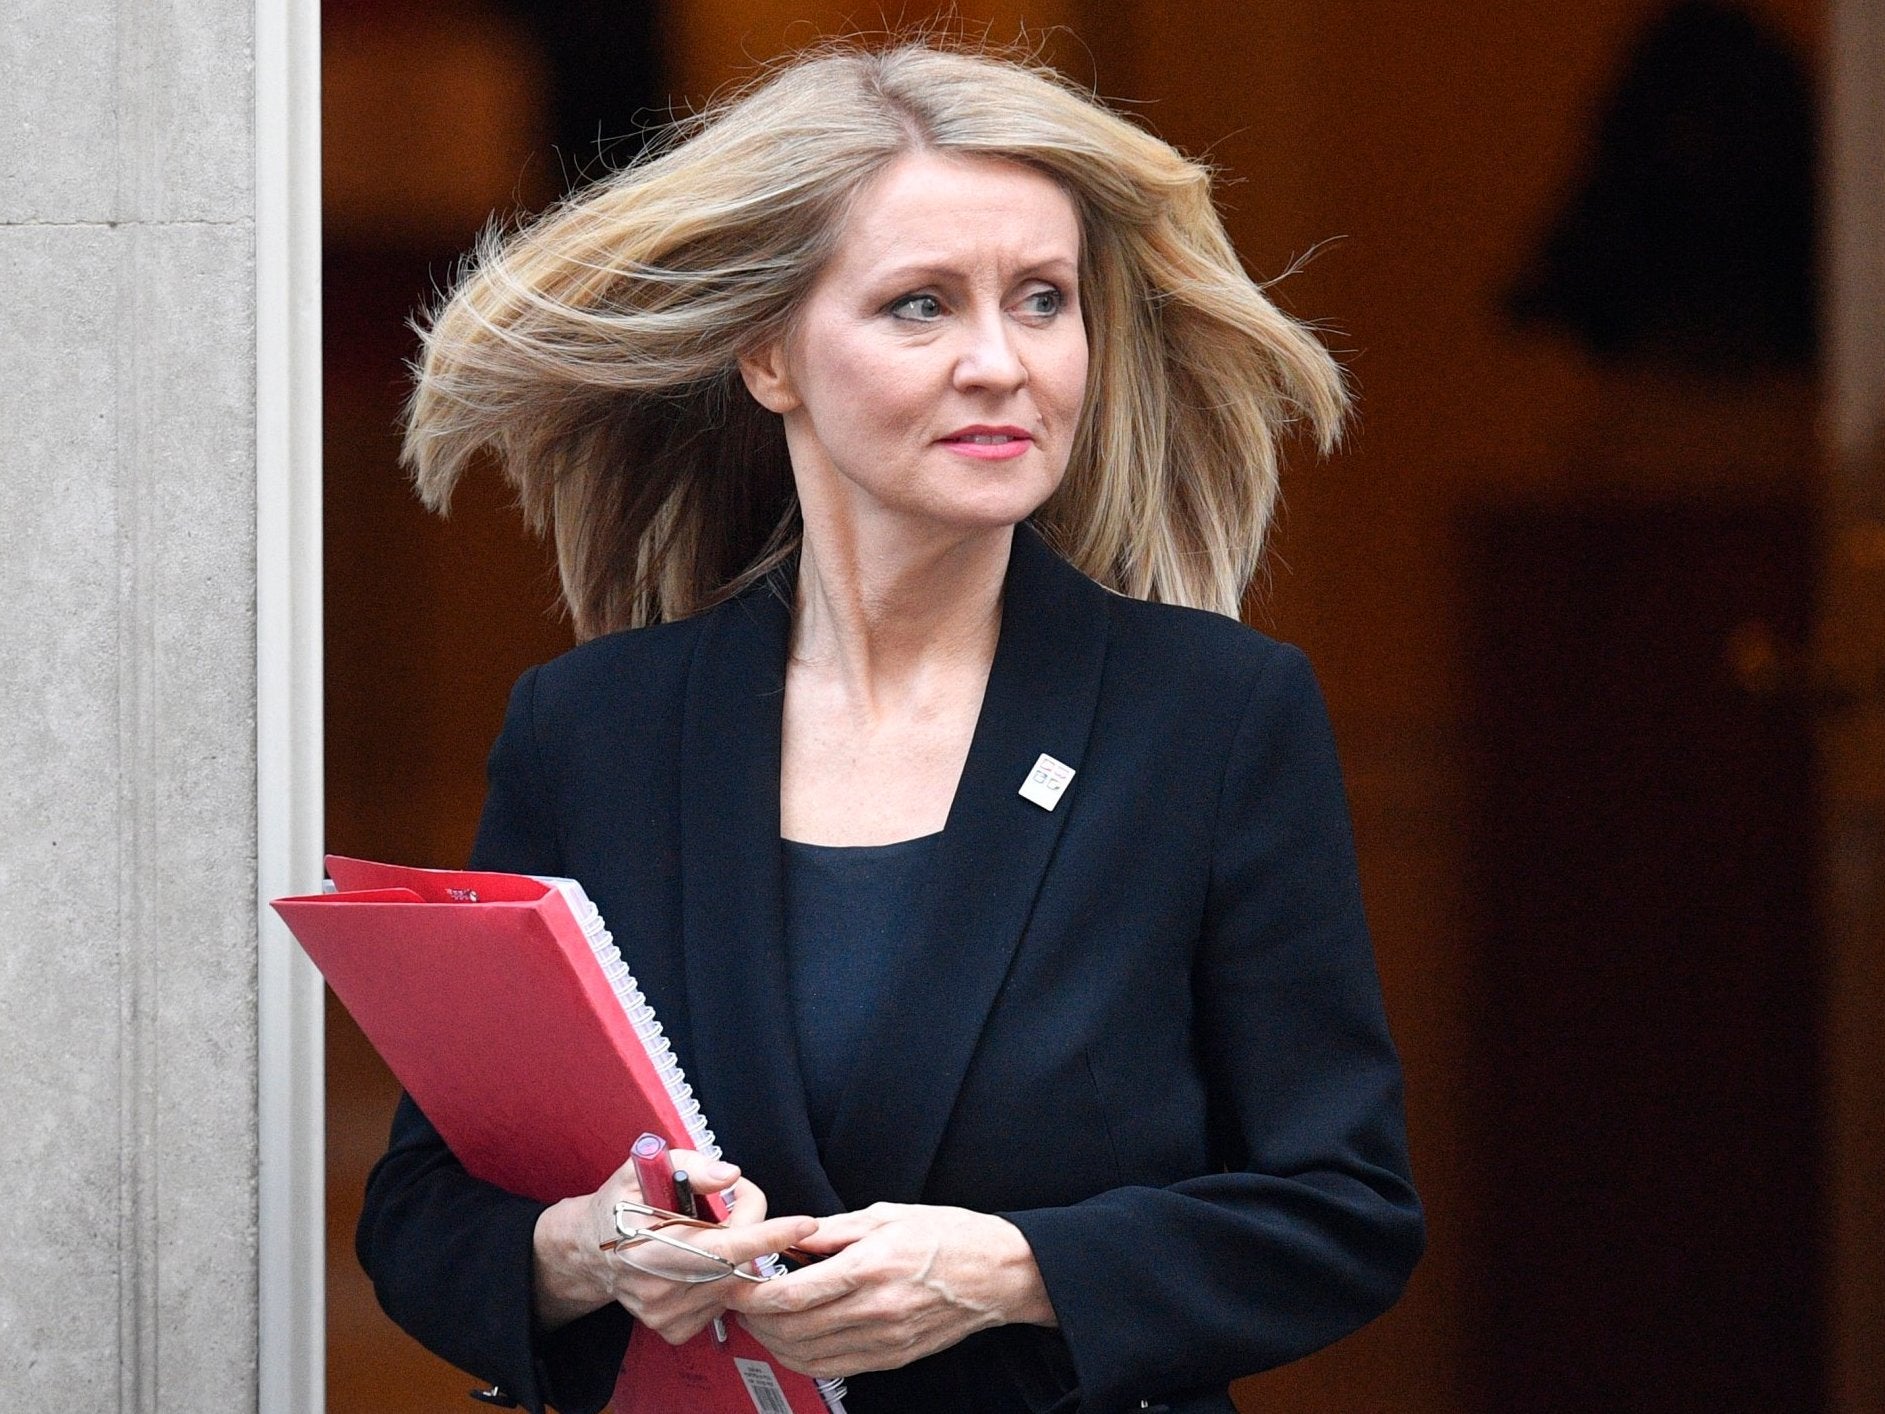 Esther mcvey profile who is